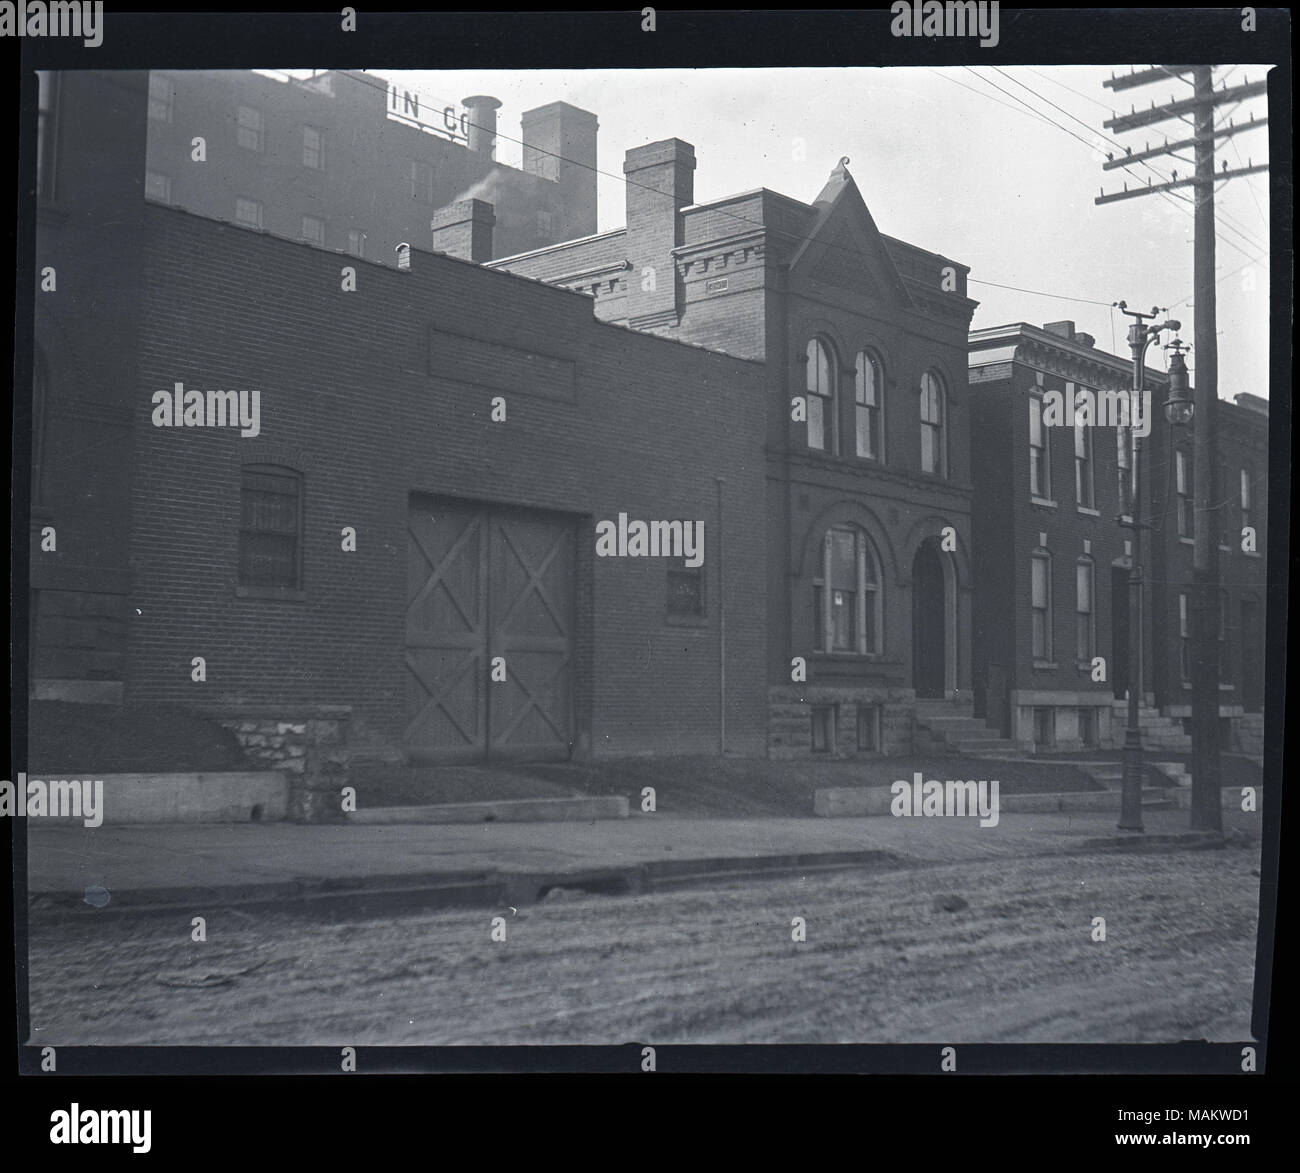 Horizontal, black and white photograph showing a row of two-story brick residential buildings next door to an unidentified industrial or commercial building. The residential buildings have decorative brickwork along the roofline and around the windows. It is unclear if the buildings are single family homes or multi-family apartment buildings. A small poster with a light background and a cross in the center is displayed in one of the windows, possibly a Red Cross Service Flag given out during World War I. The industrial or commercial building is also brick. There is a set of large double doors  Stock Photo